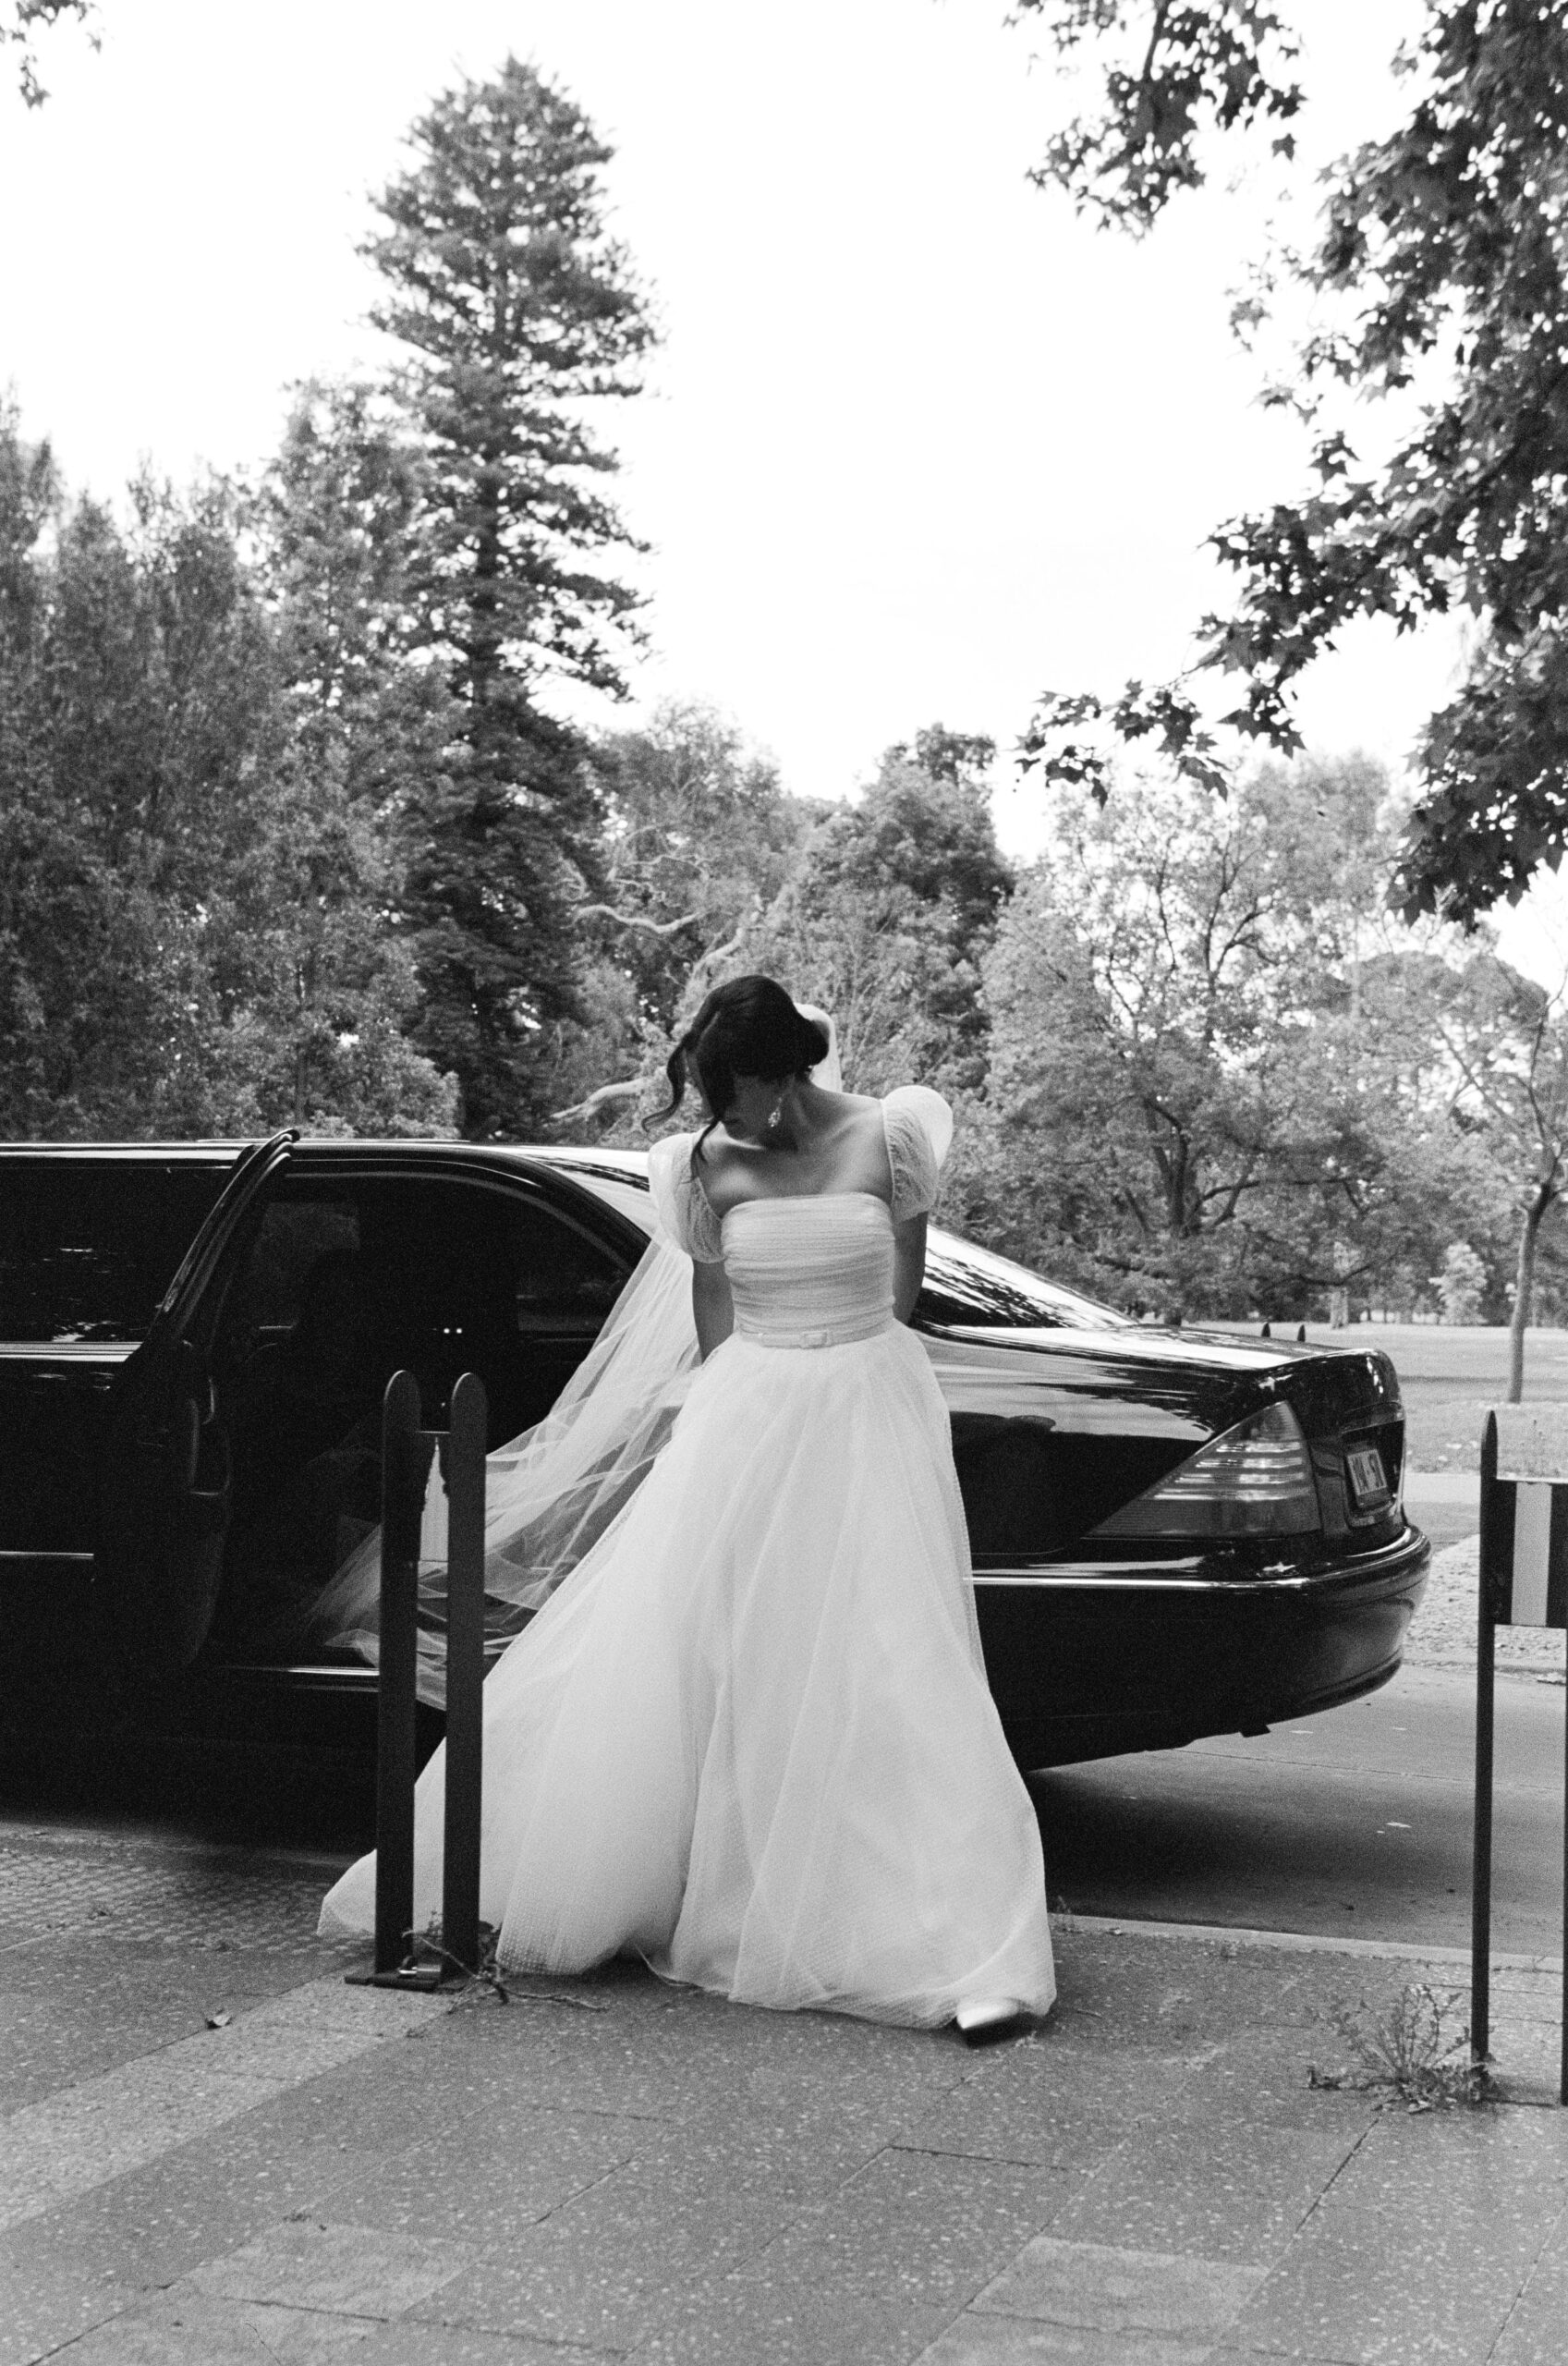 Bride Maddy getting out of car with veil flowing behind